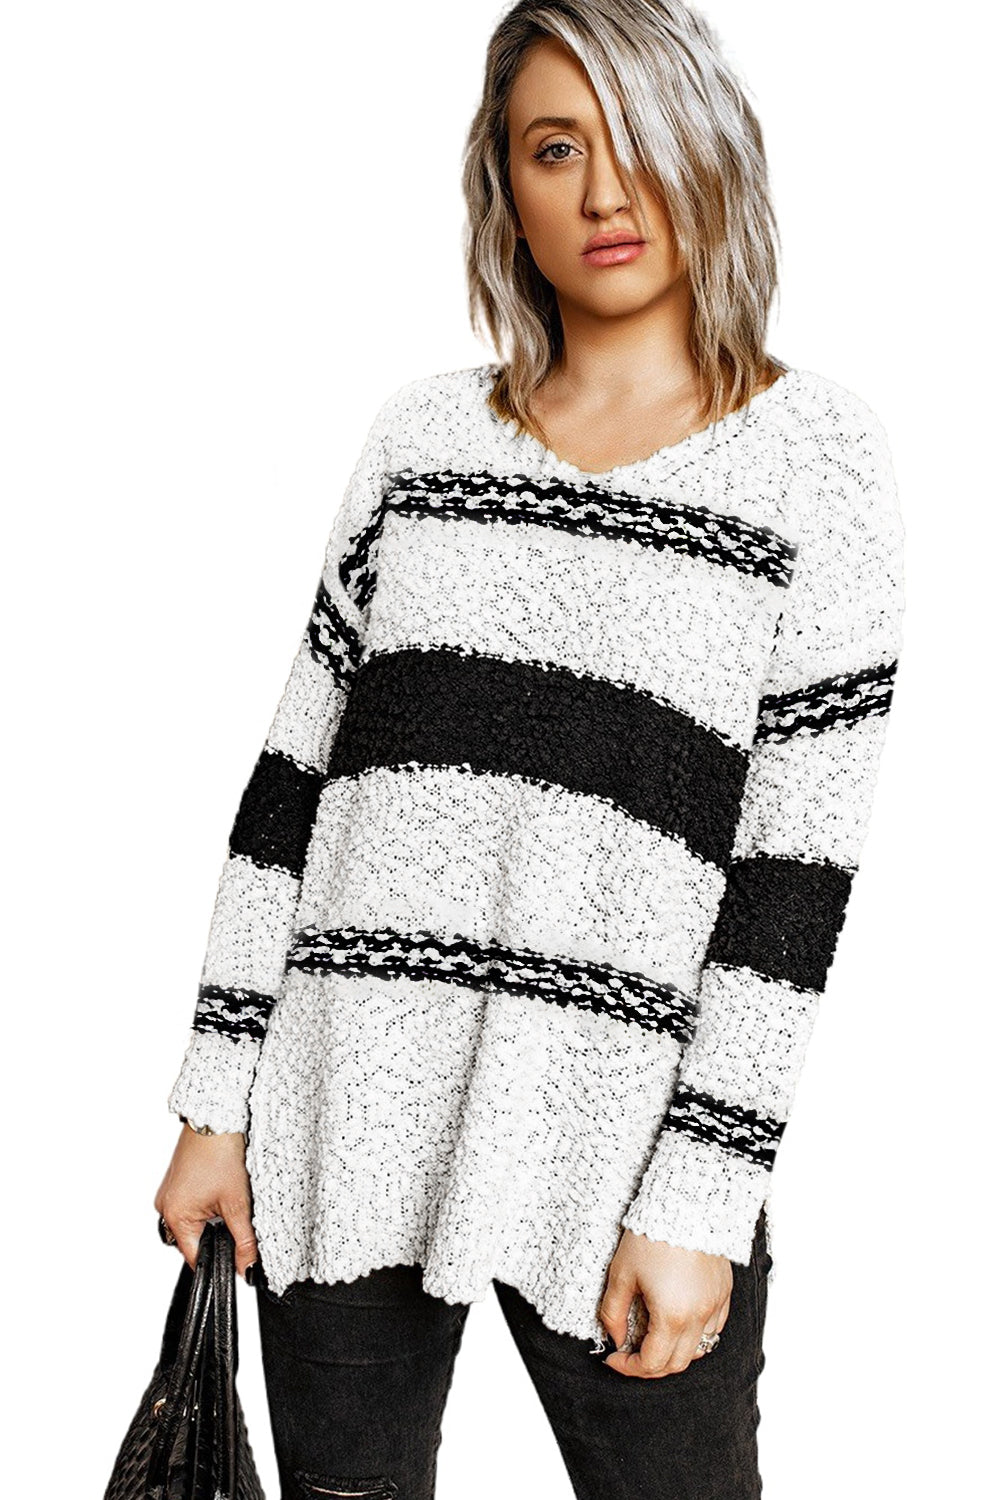 Women's Striped Colorblock V Neck Long Sleeve Oversized Knitted Pullover Sweater